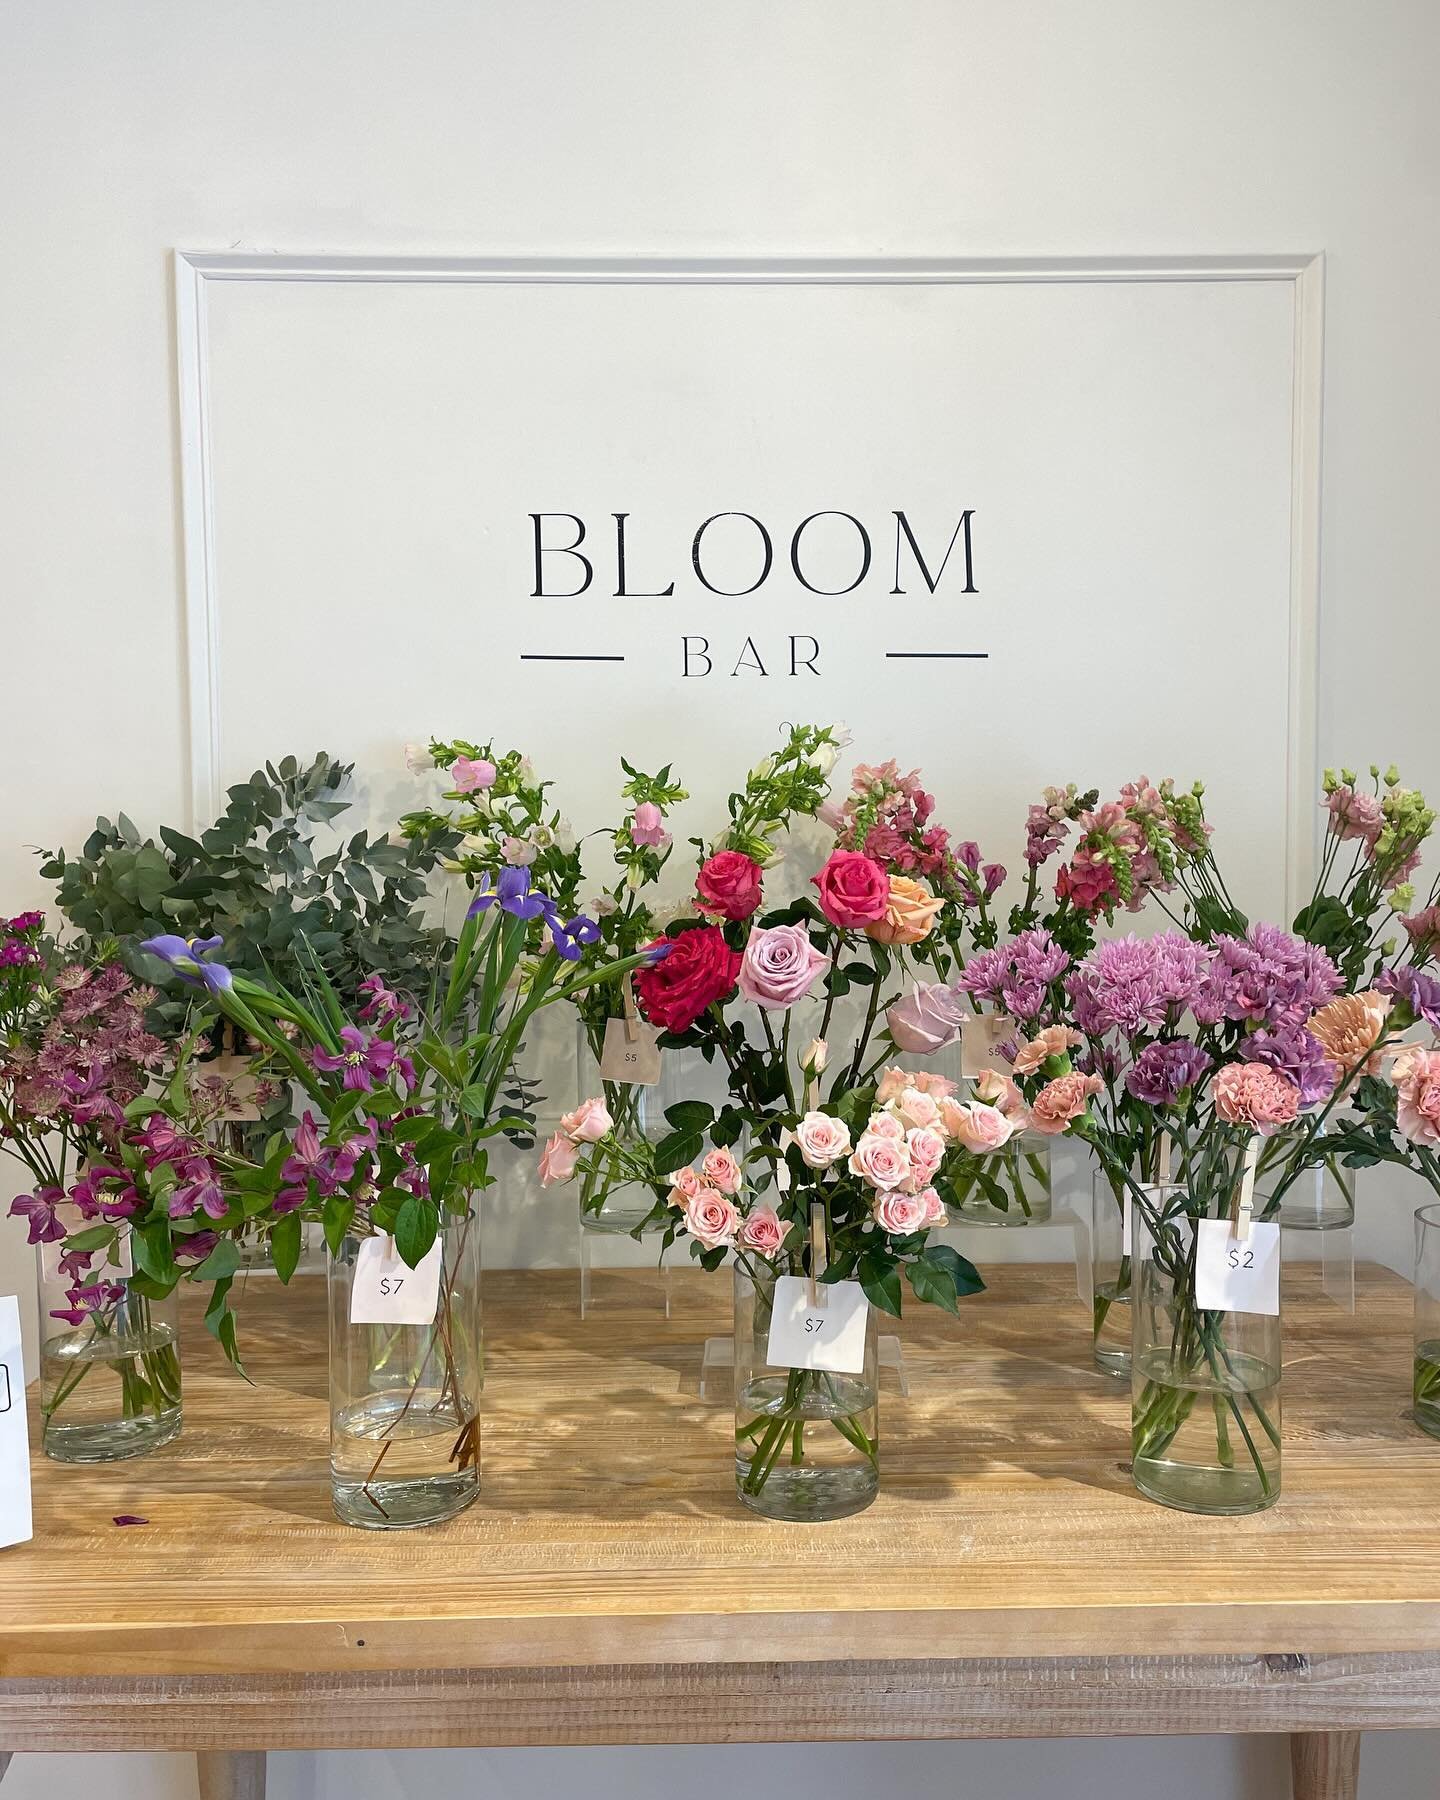 🌸Stop in to shop the Bloom Bar and build a bouquet for Mom this weekend! 

🌸Shop hours Saturday and Sunday 8am-3pm! 

🌸 Grab and Go arrangements and bouquets will also be available while supplies last.